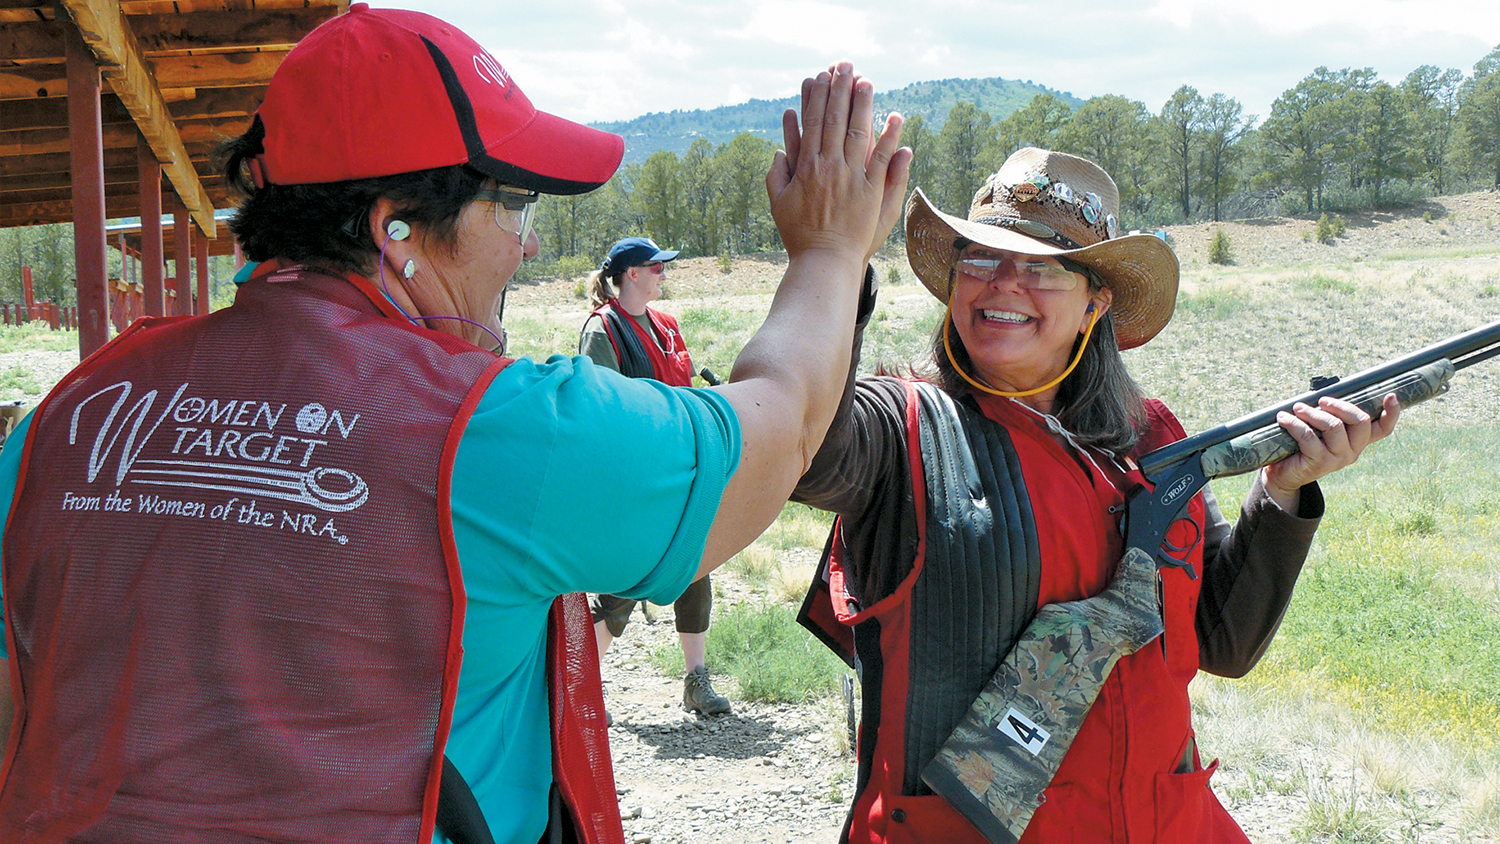 Smith & Wesson's Donation to NRA Women On Target